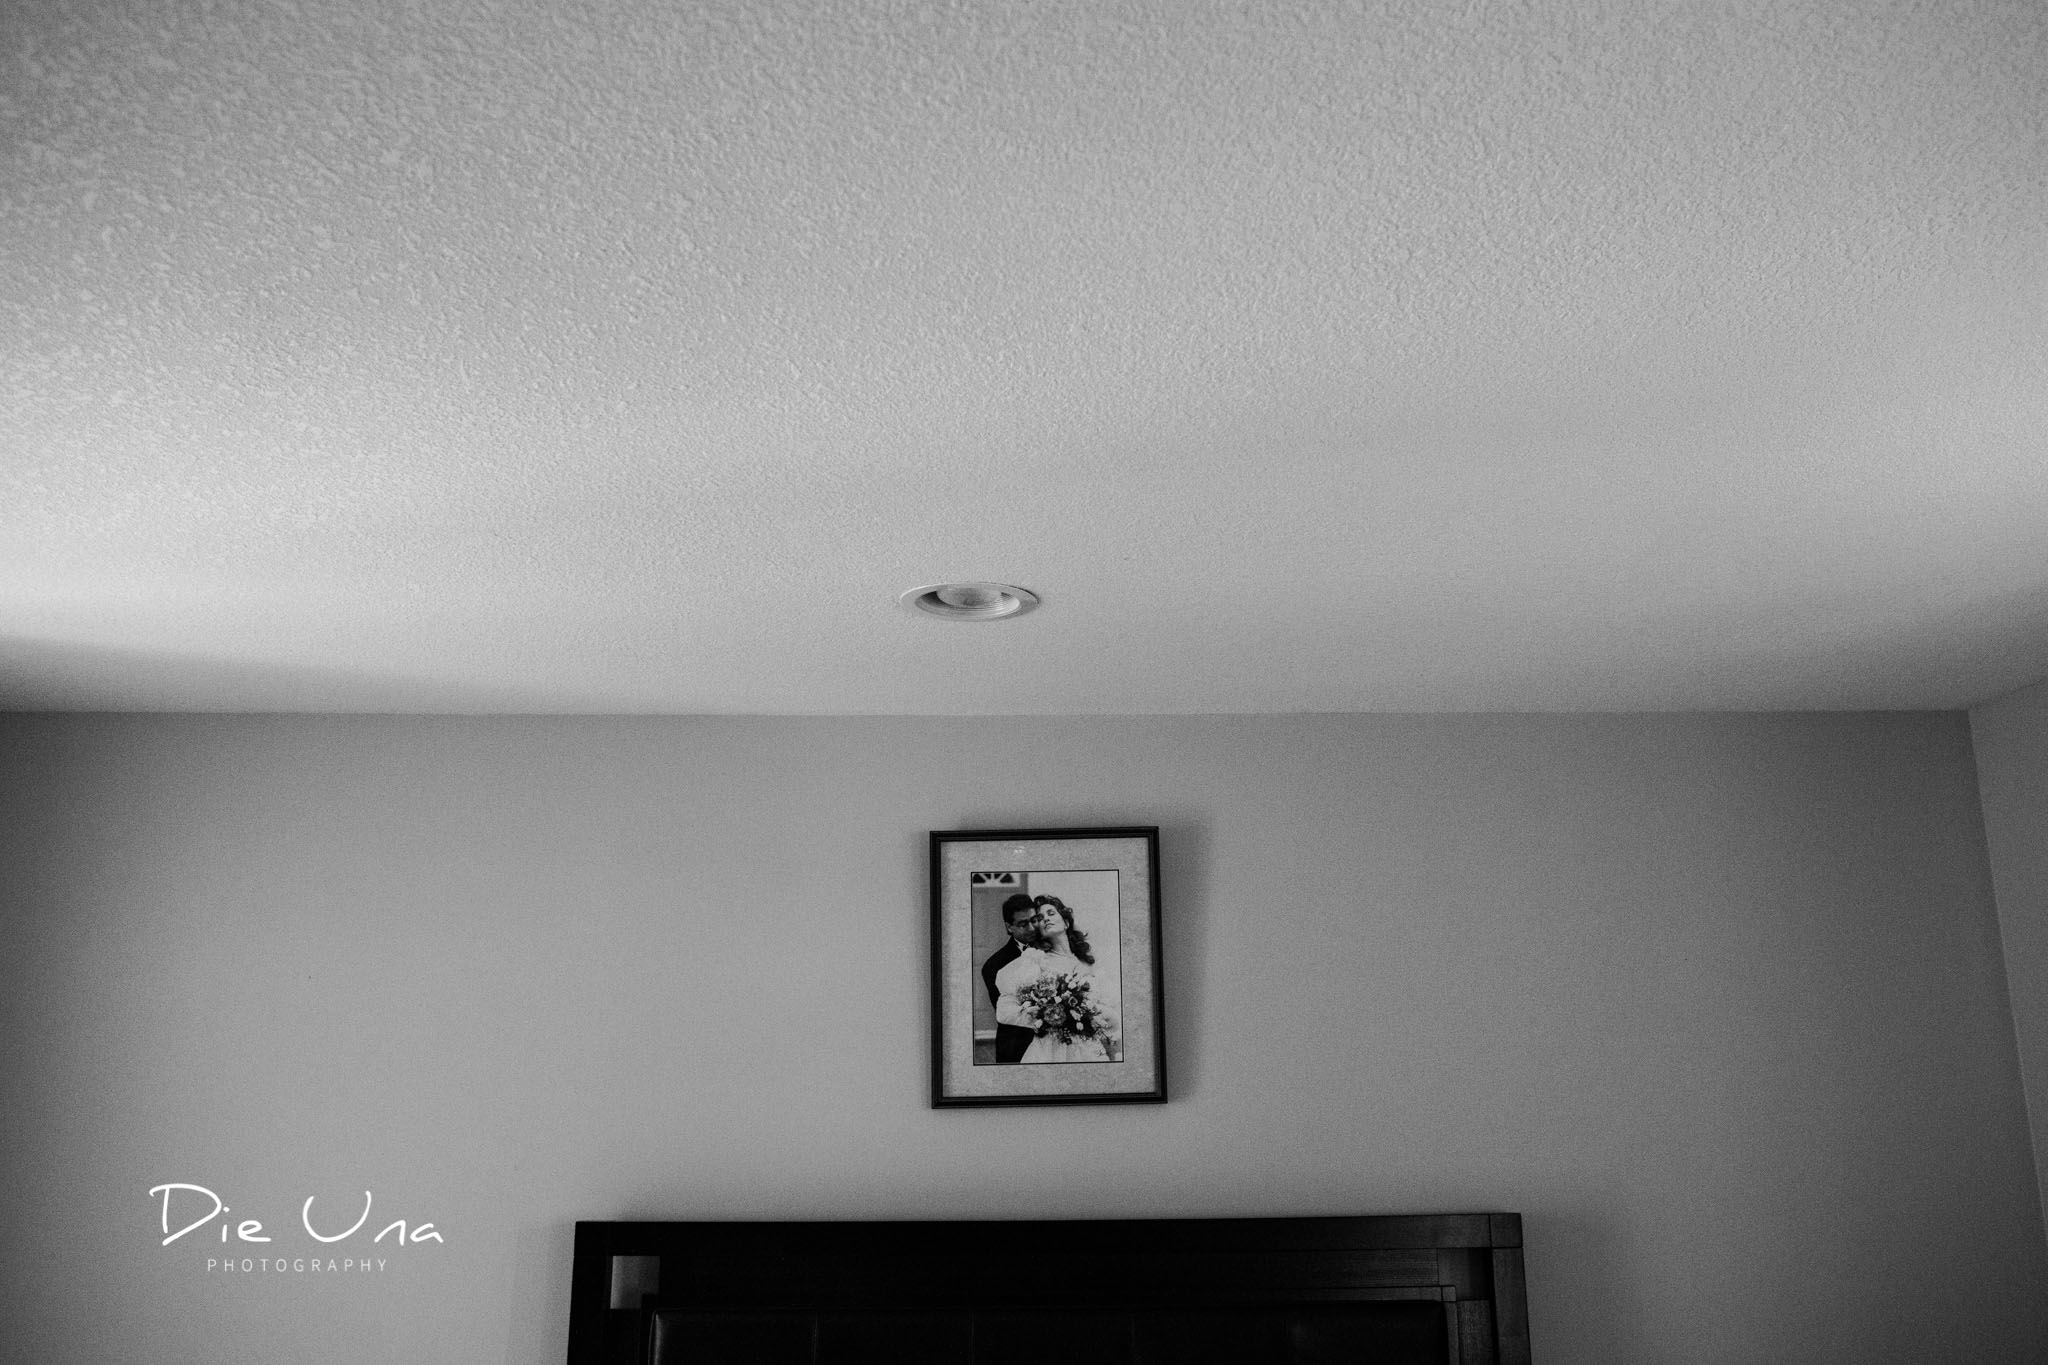 Old wedding portrait hanging in bride getting ready space black and white wedding photography.jpg